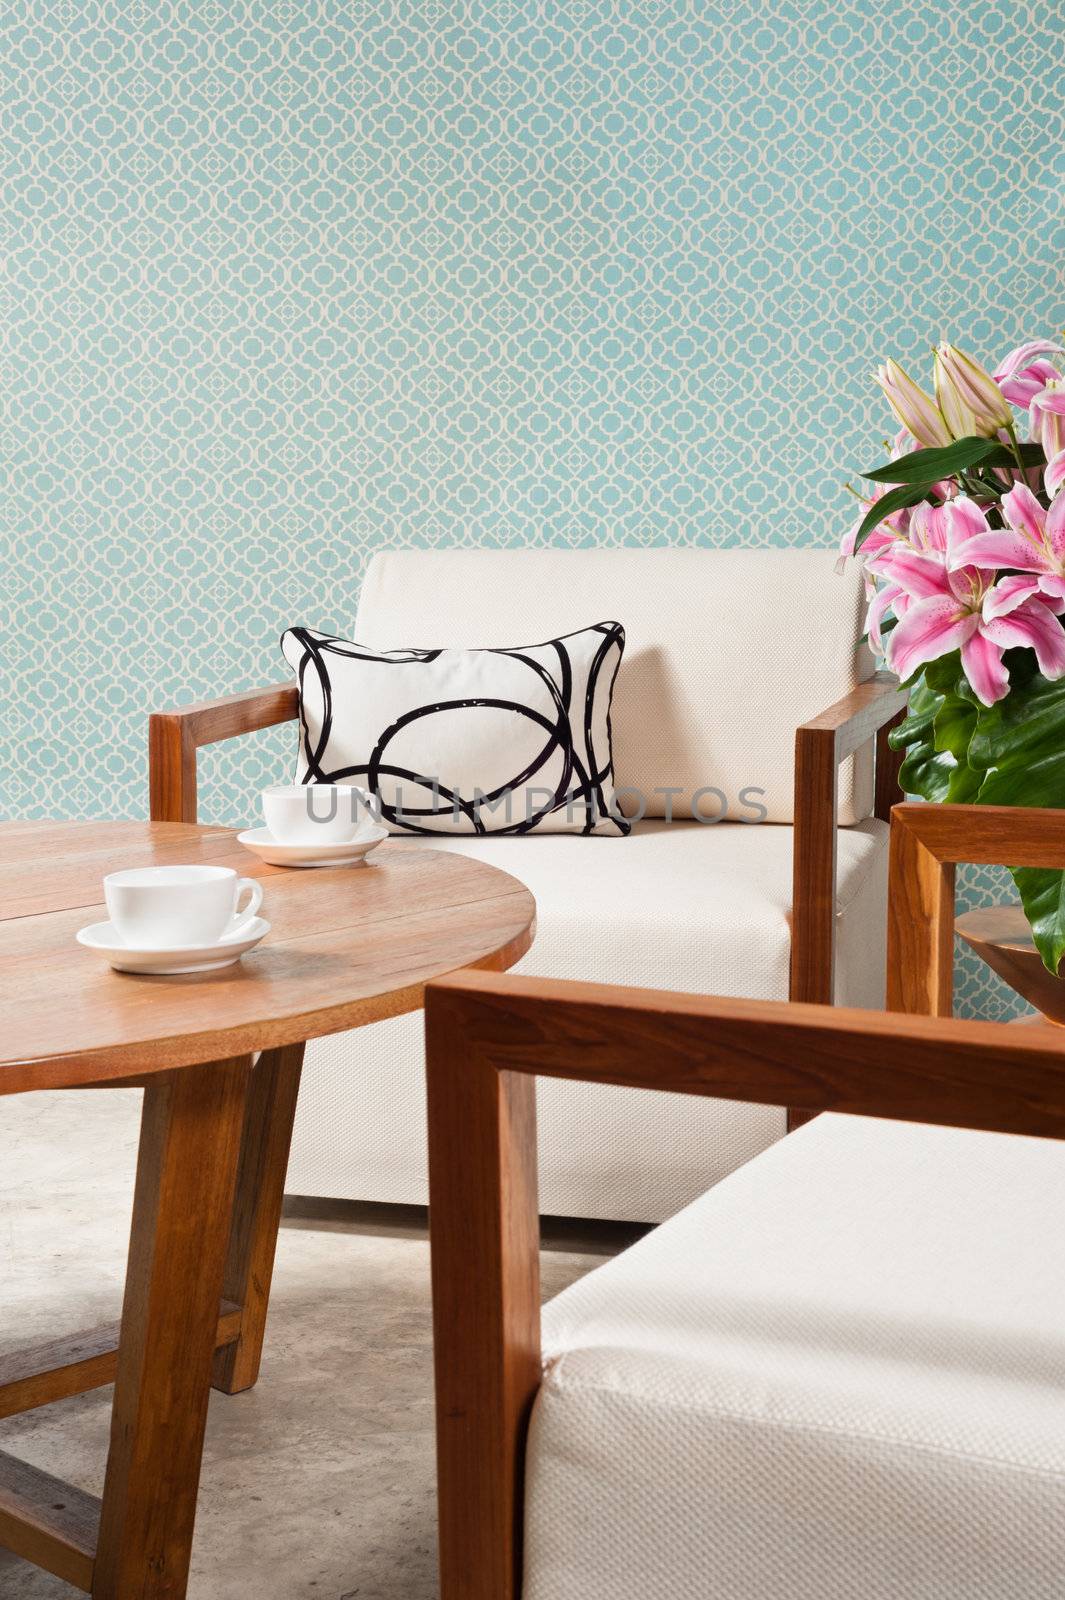 Brown white furniture in a living room and turquoise blue wallpaper